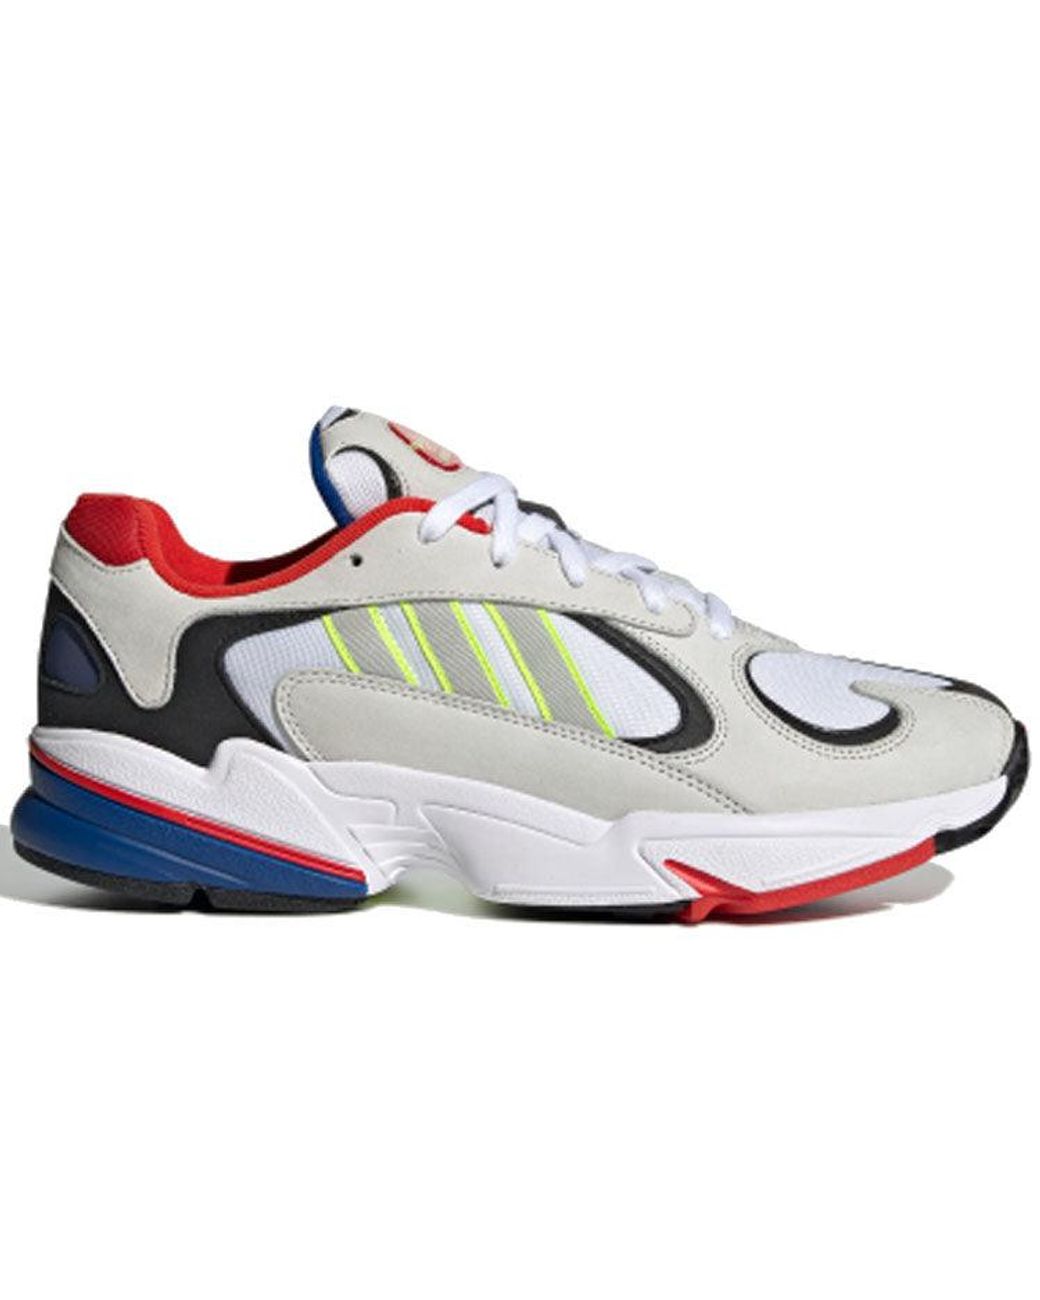 adidas Originals Yung-1 Low Top Casual Dad Shoes Black Red White | Lyst